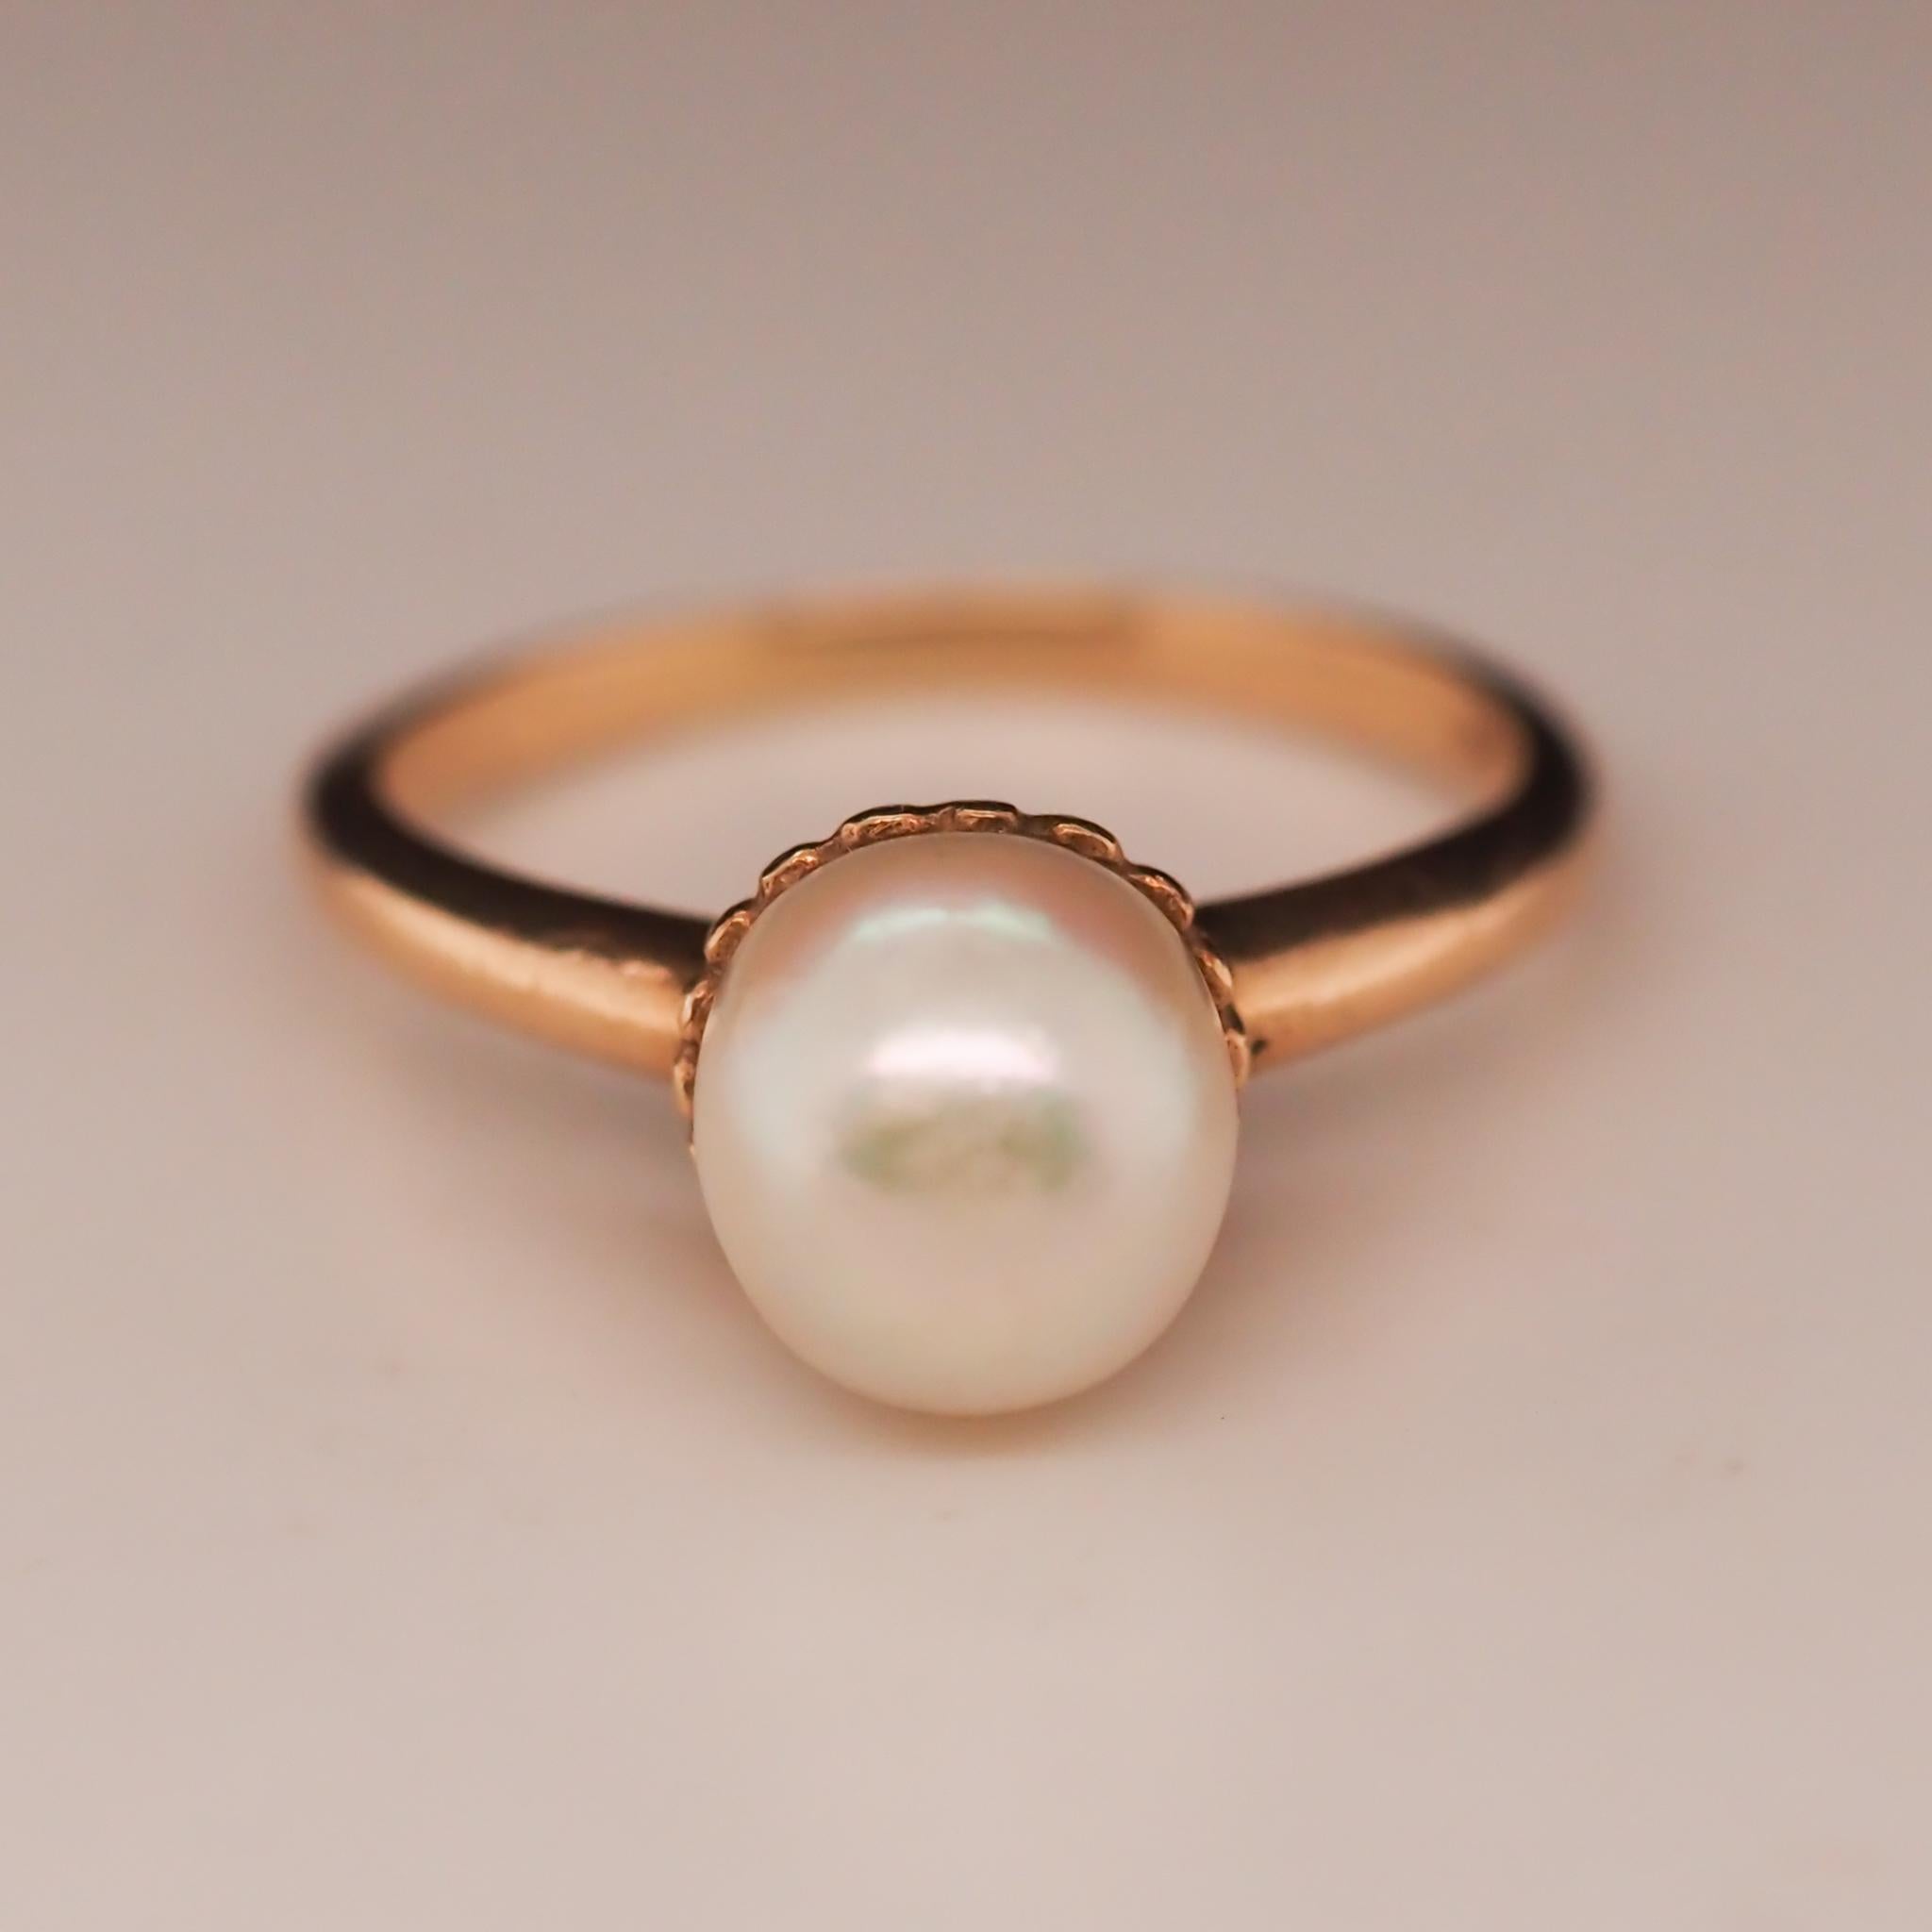 1900s Edwardian 14K Yellow Gold Pearl Ring with Scallop Prongs For Sale 1